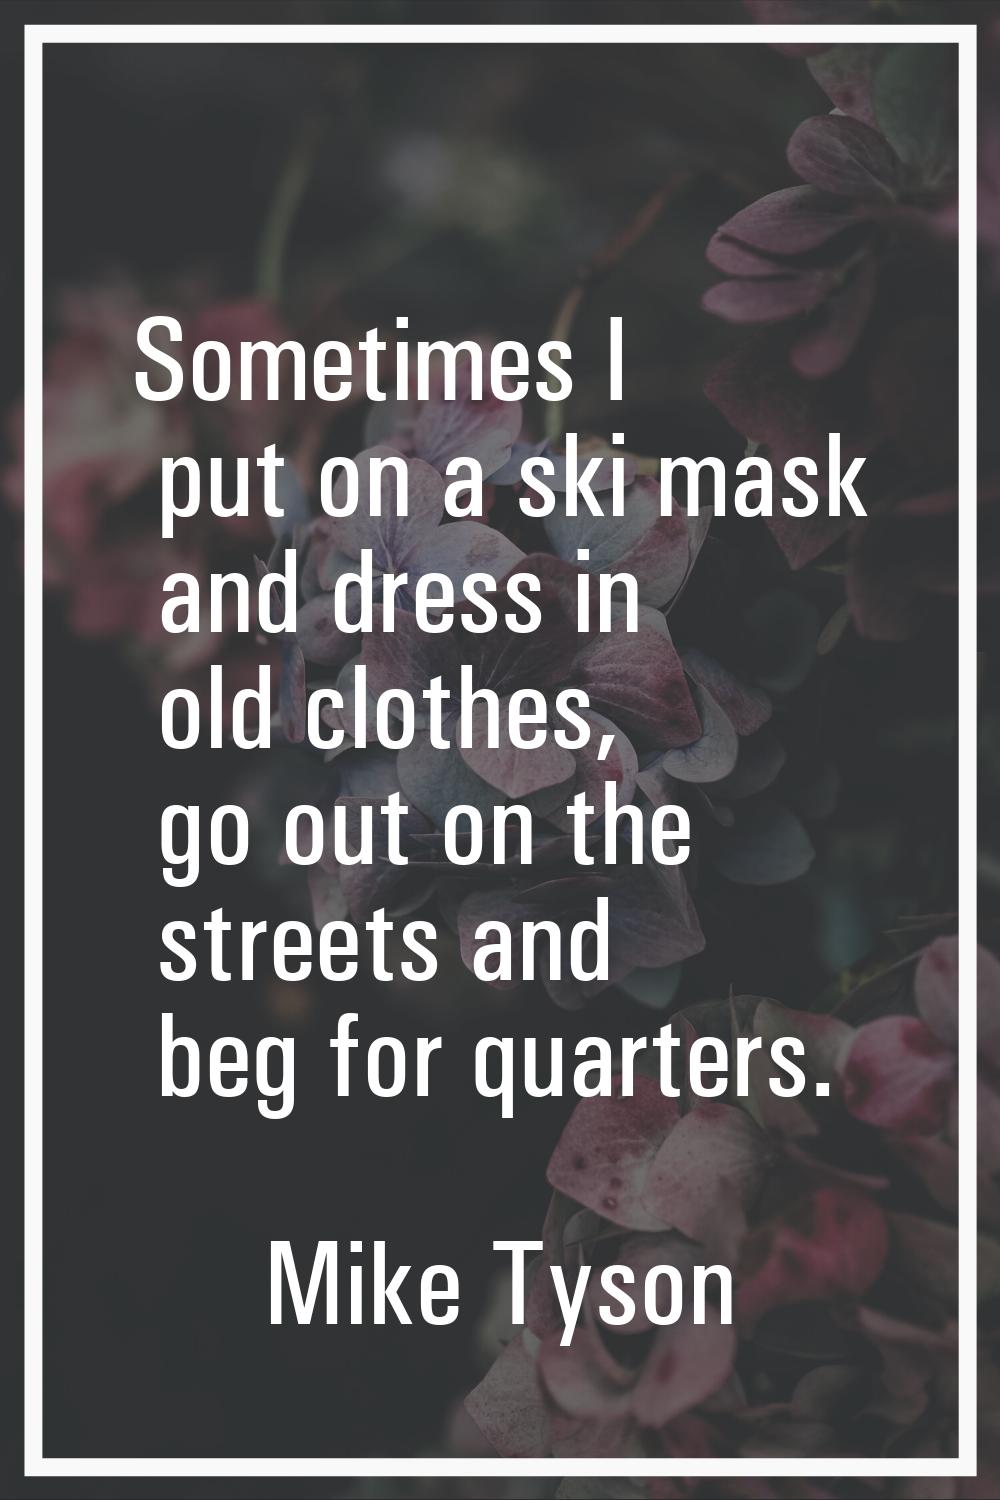 Sometimes I put on a ski mask and dress in old clothes, go out on the streets and beg for quarters.